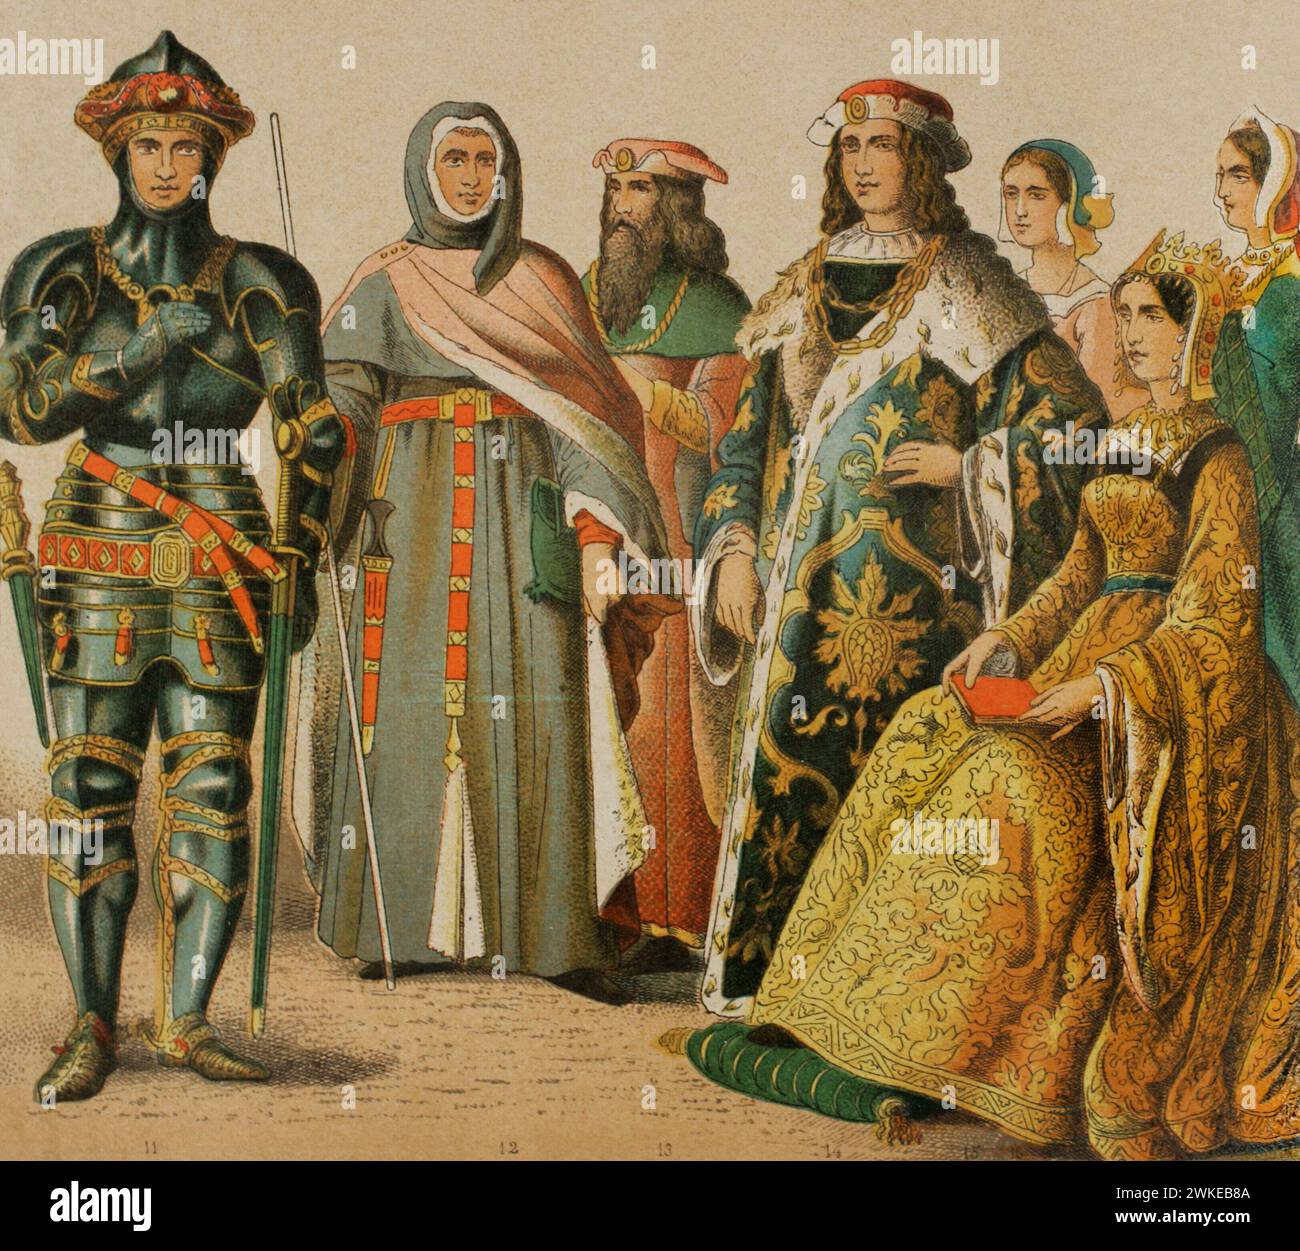 History of England. 1400-1450. From left to right, 11: knight, 12: criminal judge, 13: court of Henry VI, 14: Henry VI, 15: court of King Henry VI, 16: Margaret of Anjou (1430-1482), wife of King Henry VI, 17: court of King Henry VI. Chromolithography. 'Historia Universal', by César Cantú. Volume VI, 1885. Stock Photo